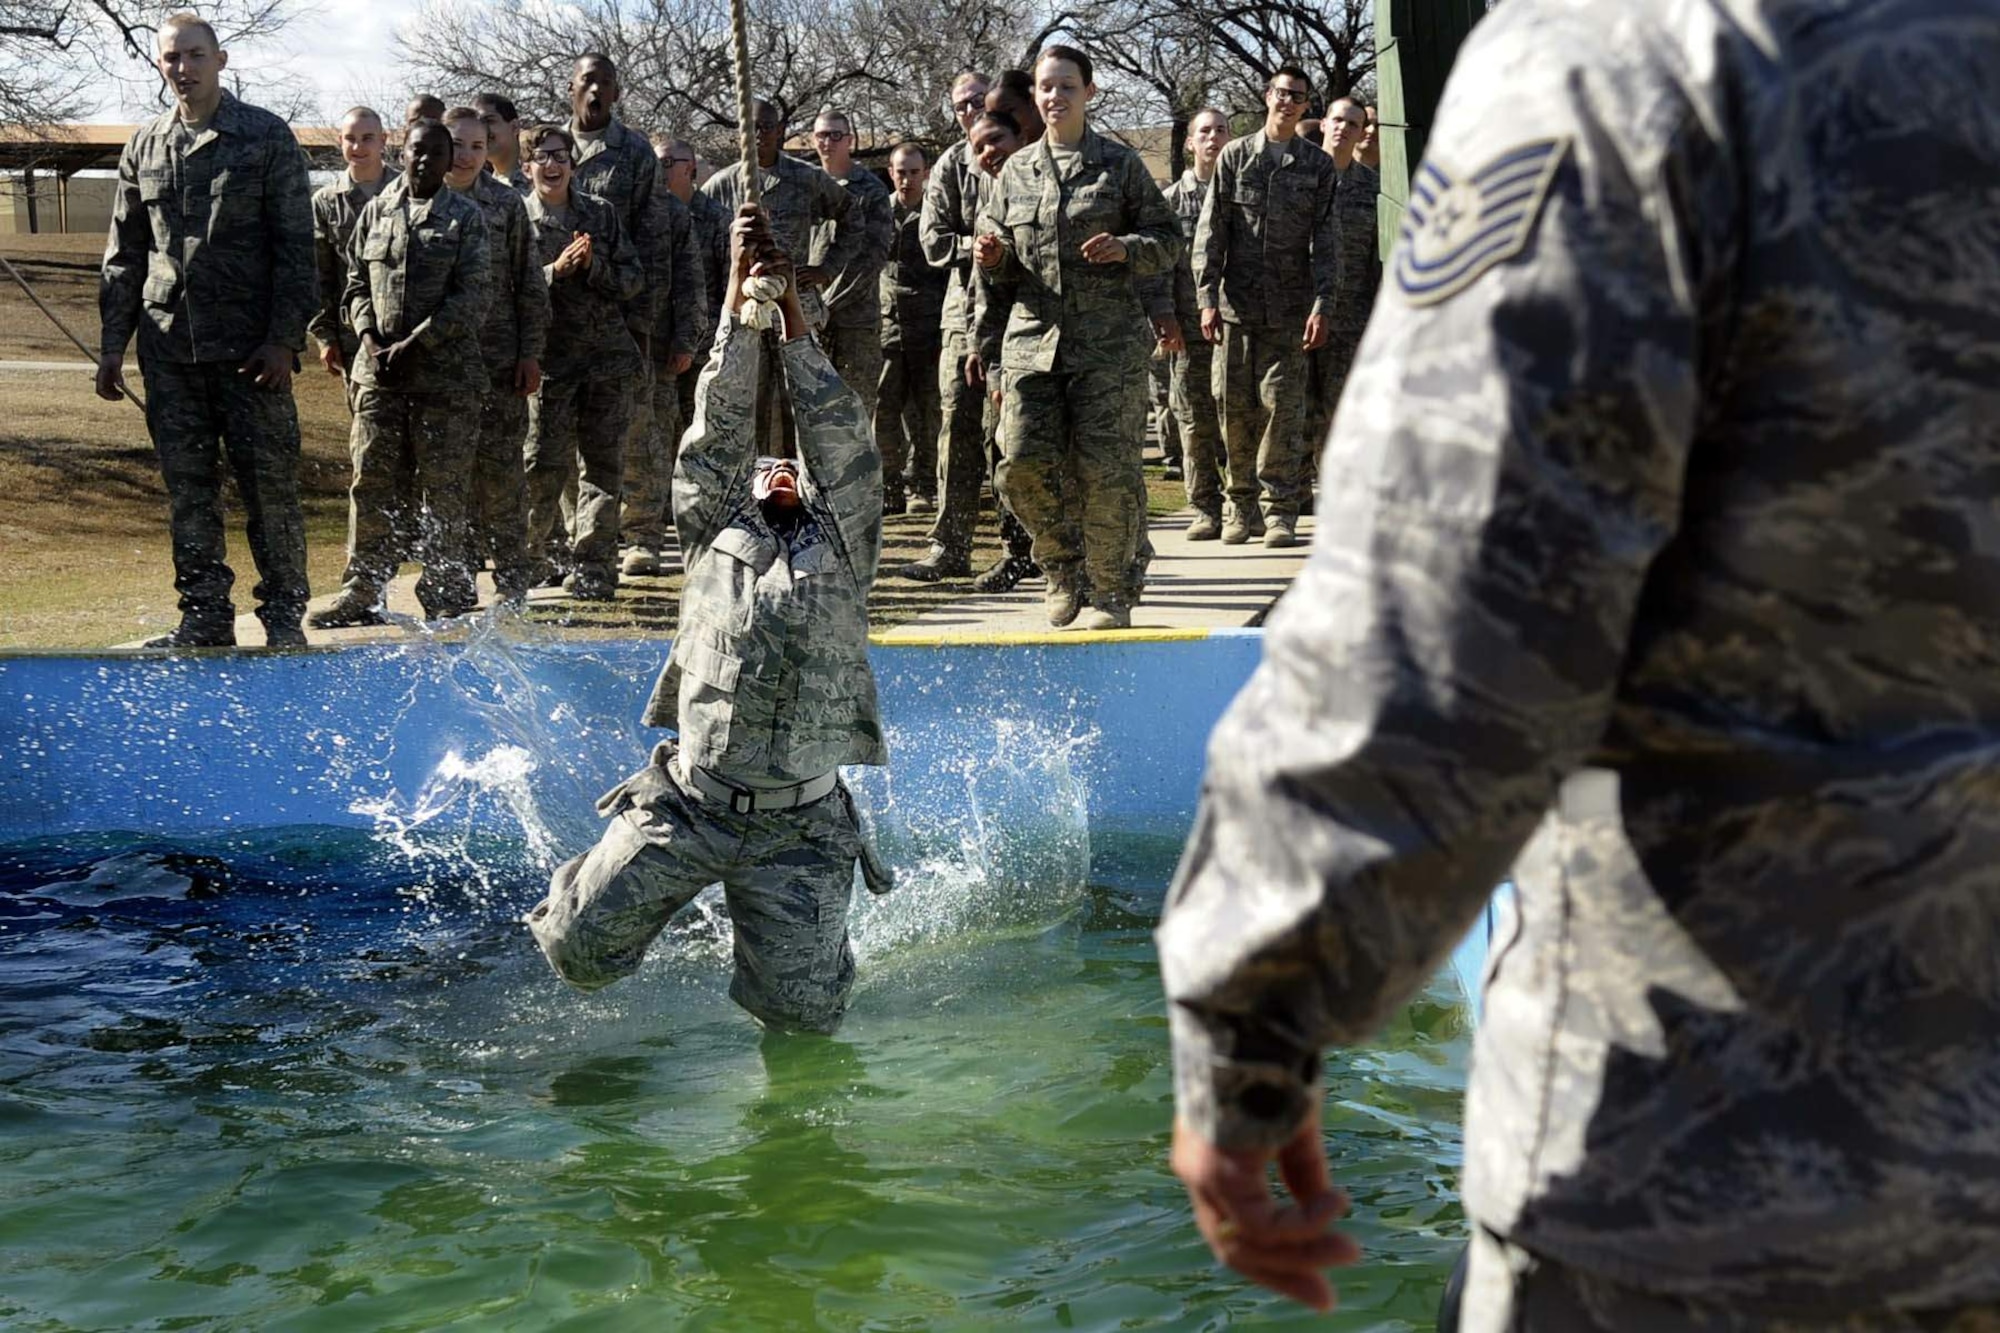 A basic trainee swings across a cold water pool as her knees get wet at the obstacle course. A military training instructor stands on the far side of the pool to assist. A recently expanded Air Force Basic Military Training program focuses on a ?warrior first? philosophy. (U.S. Air Force photo/Master Sgt. Cecilio Ricardo)
